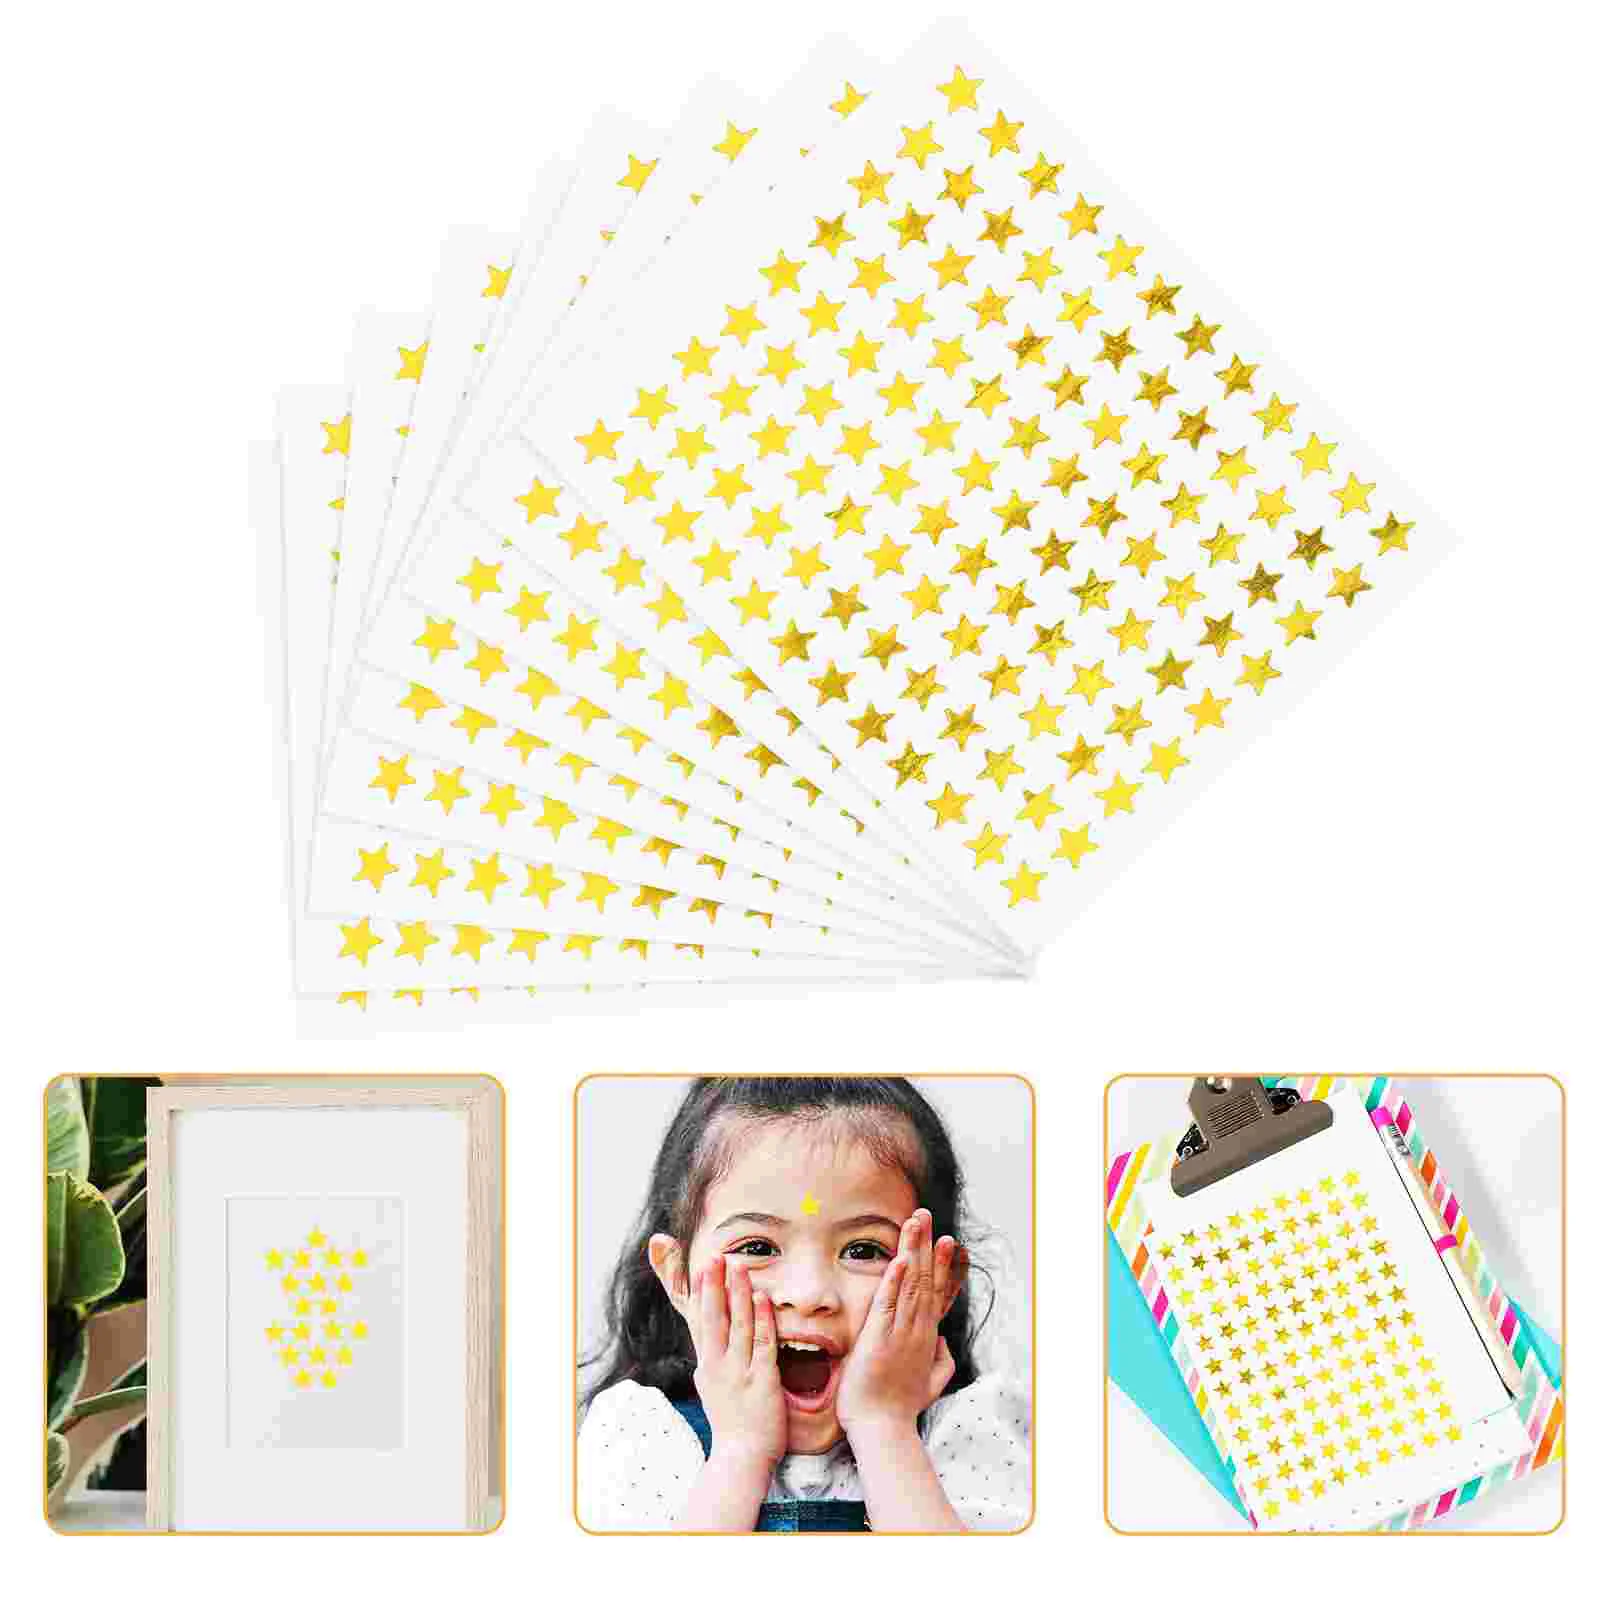 

100 Sheets Star Stickers Self-adhesive Decals Label Inspirational Encouraging Motivational Pentagram Chart